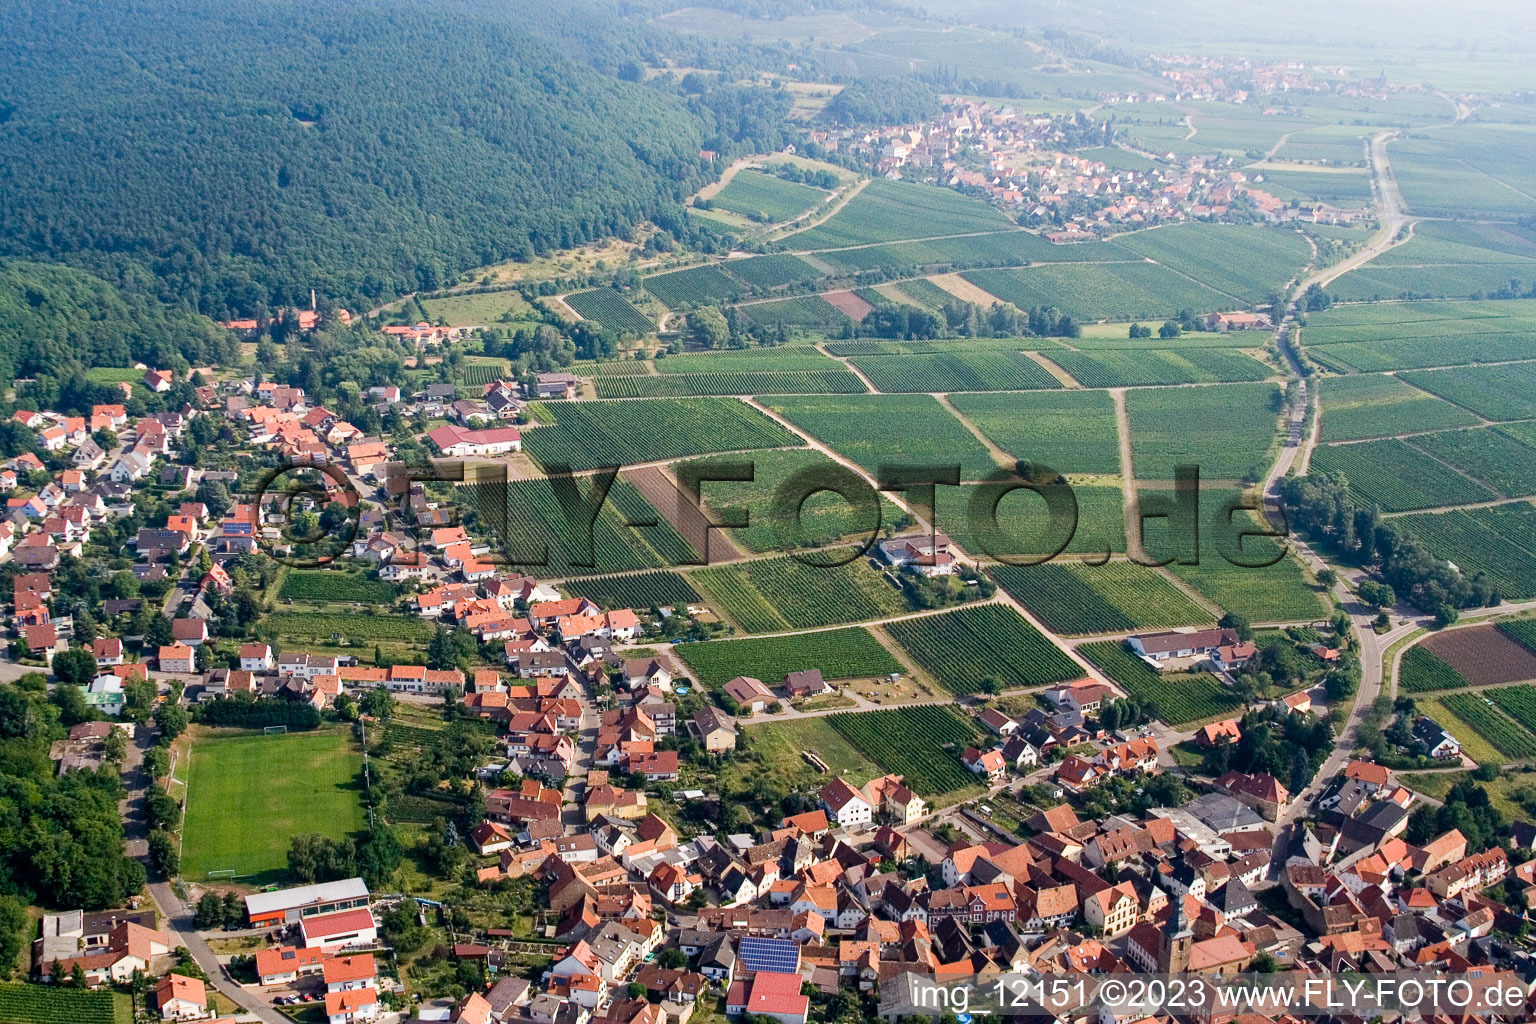 Frankweiler in the state Rhineland-Palatinate, Germany seen from above